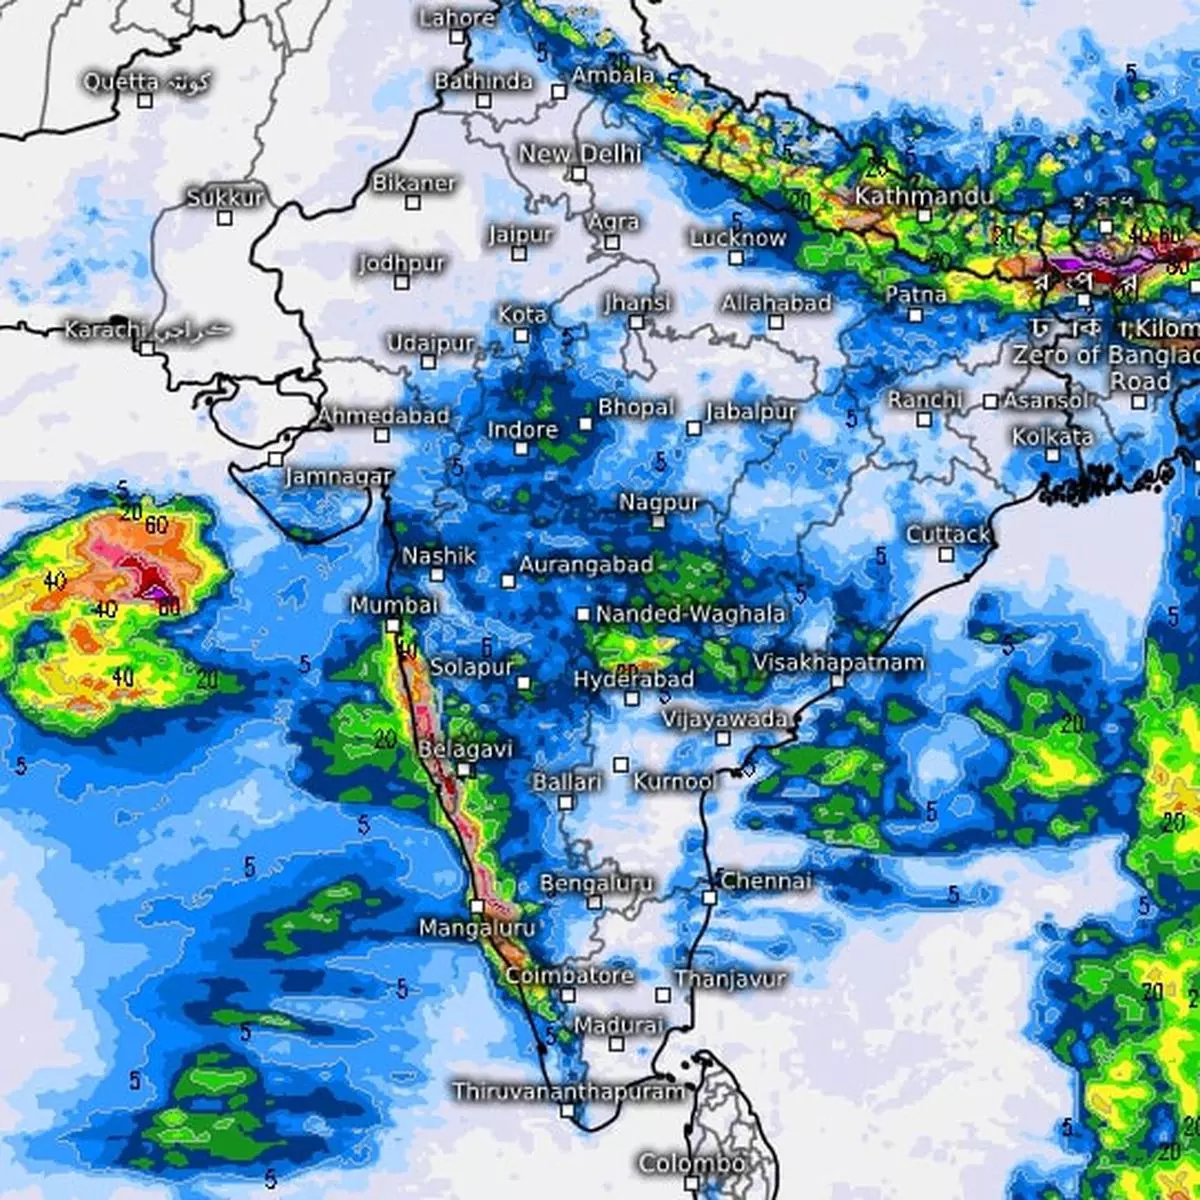 The UK Met Office agrees with the India Meteorological Department forecast for rains spreading out over Central India, with the heaviest showers along the West Coast until Tuesday, as a low-pressure area develops off the Mumbai coast on Monday.